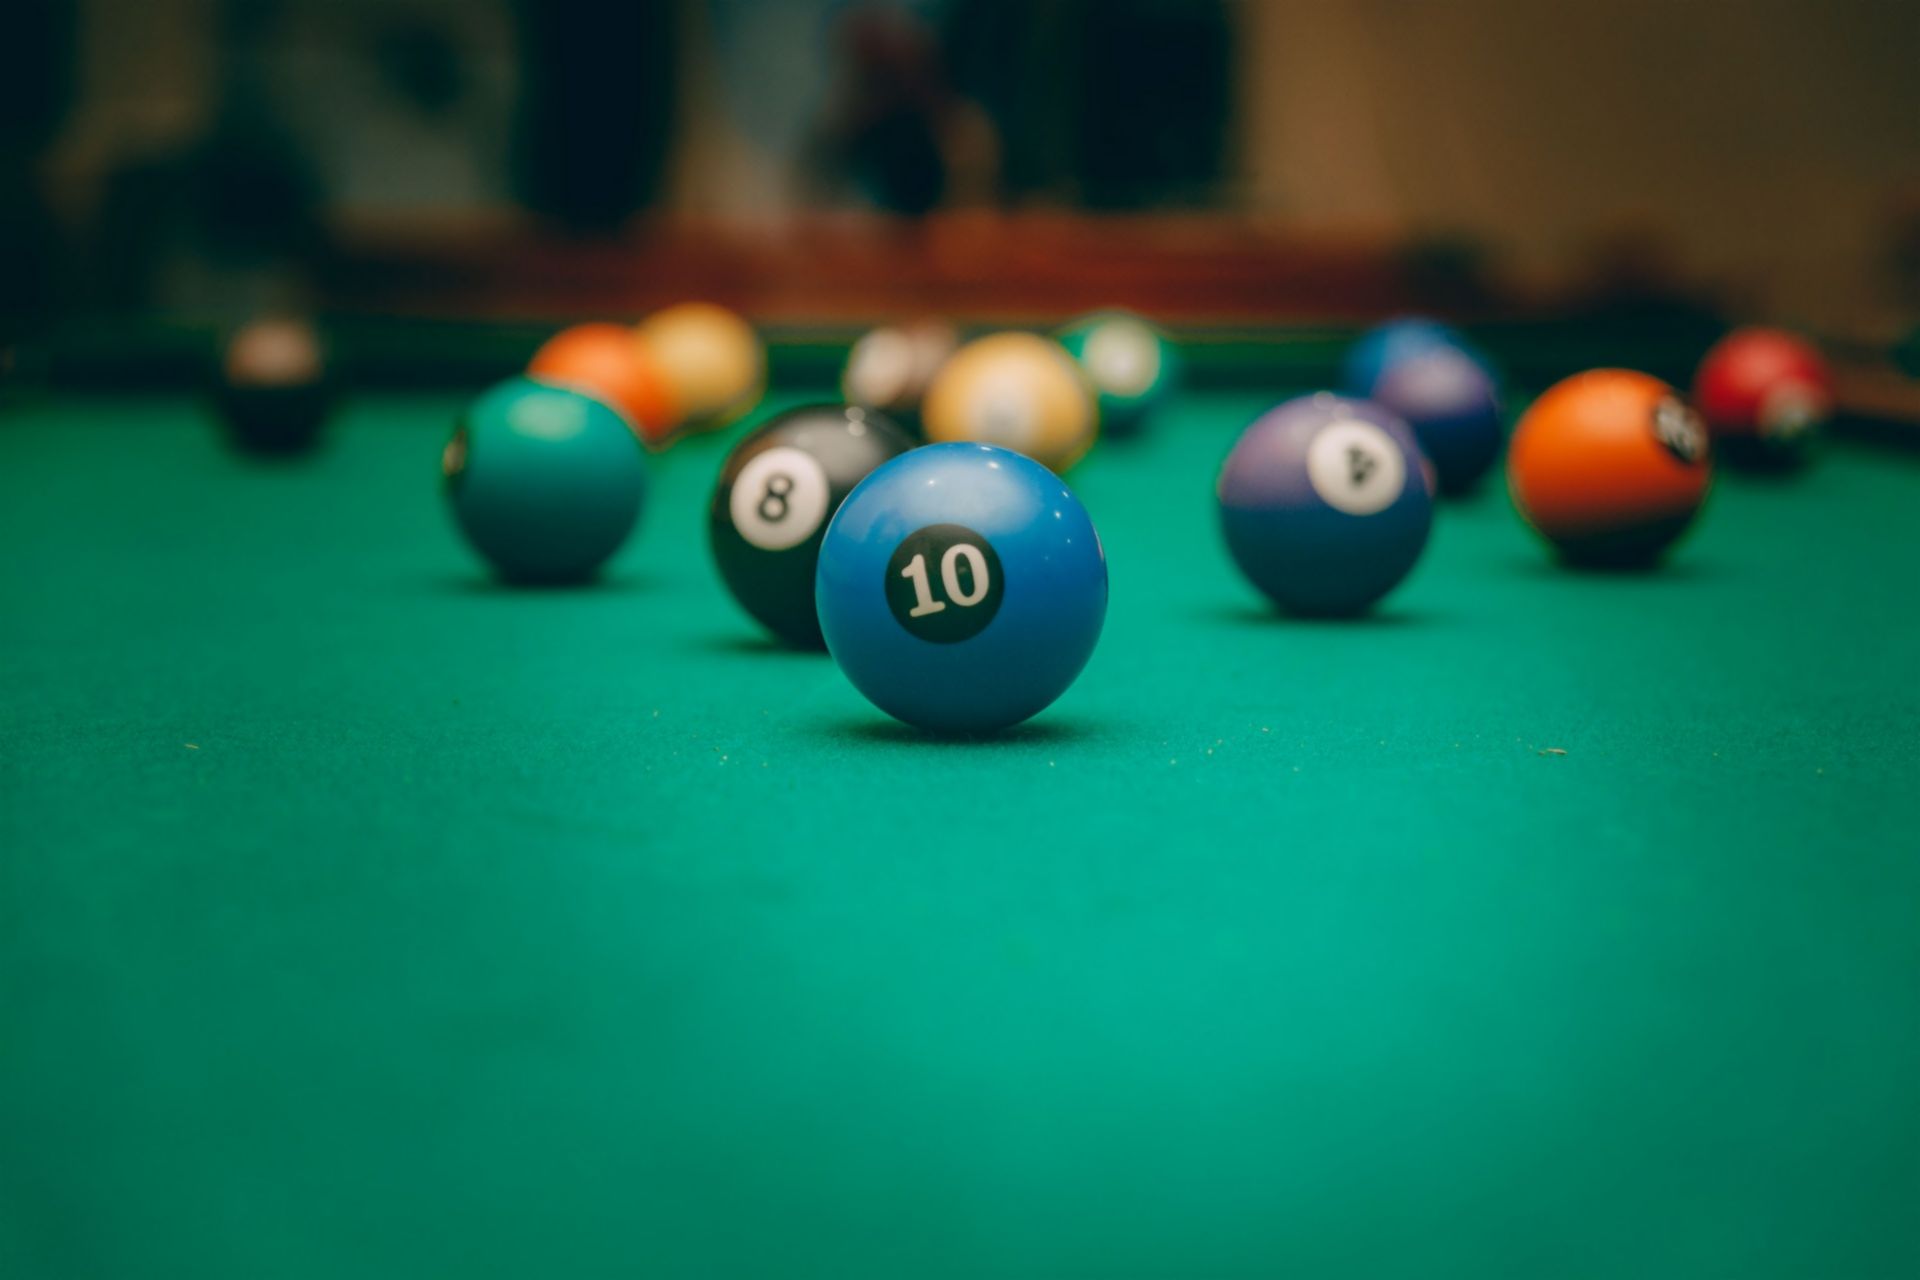 Pool table with number 10 ball in focus